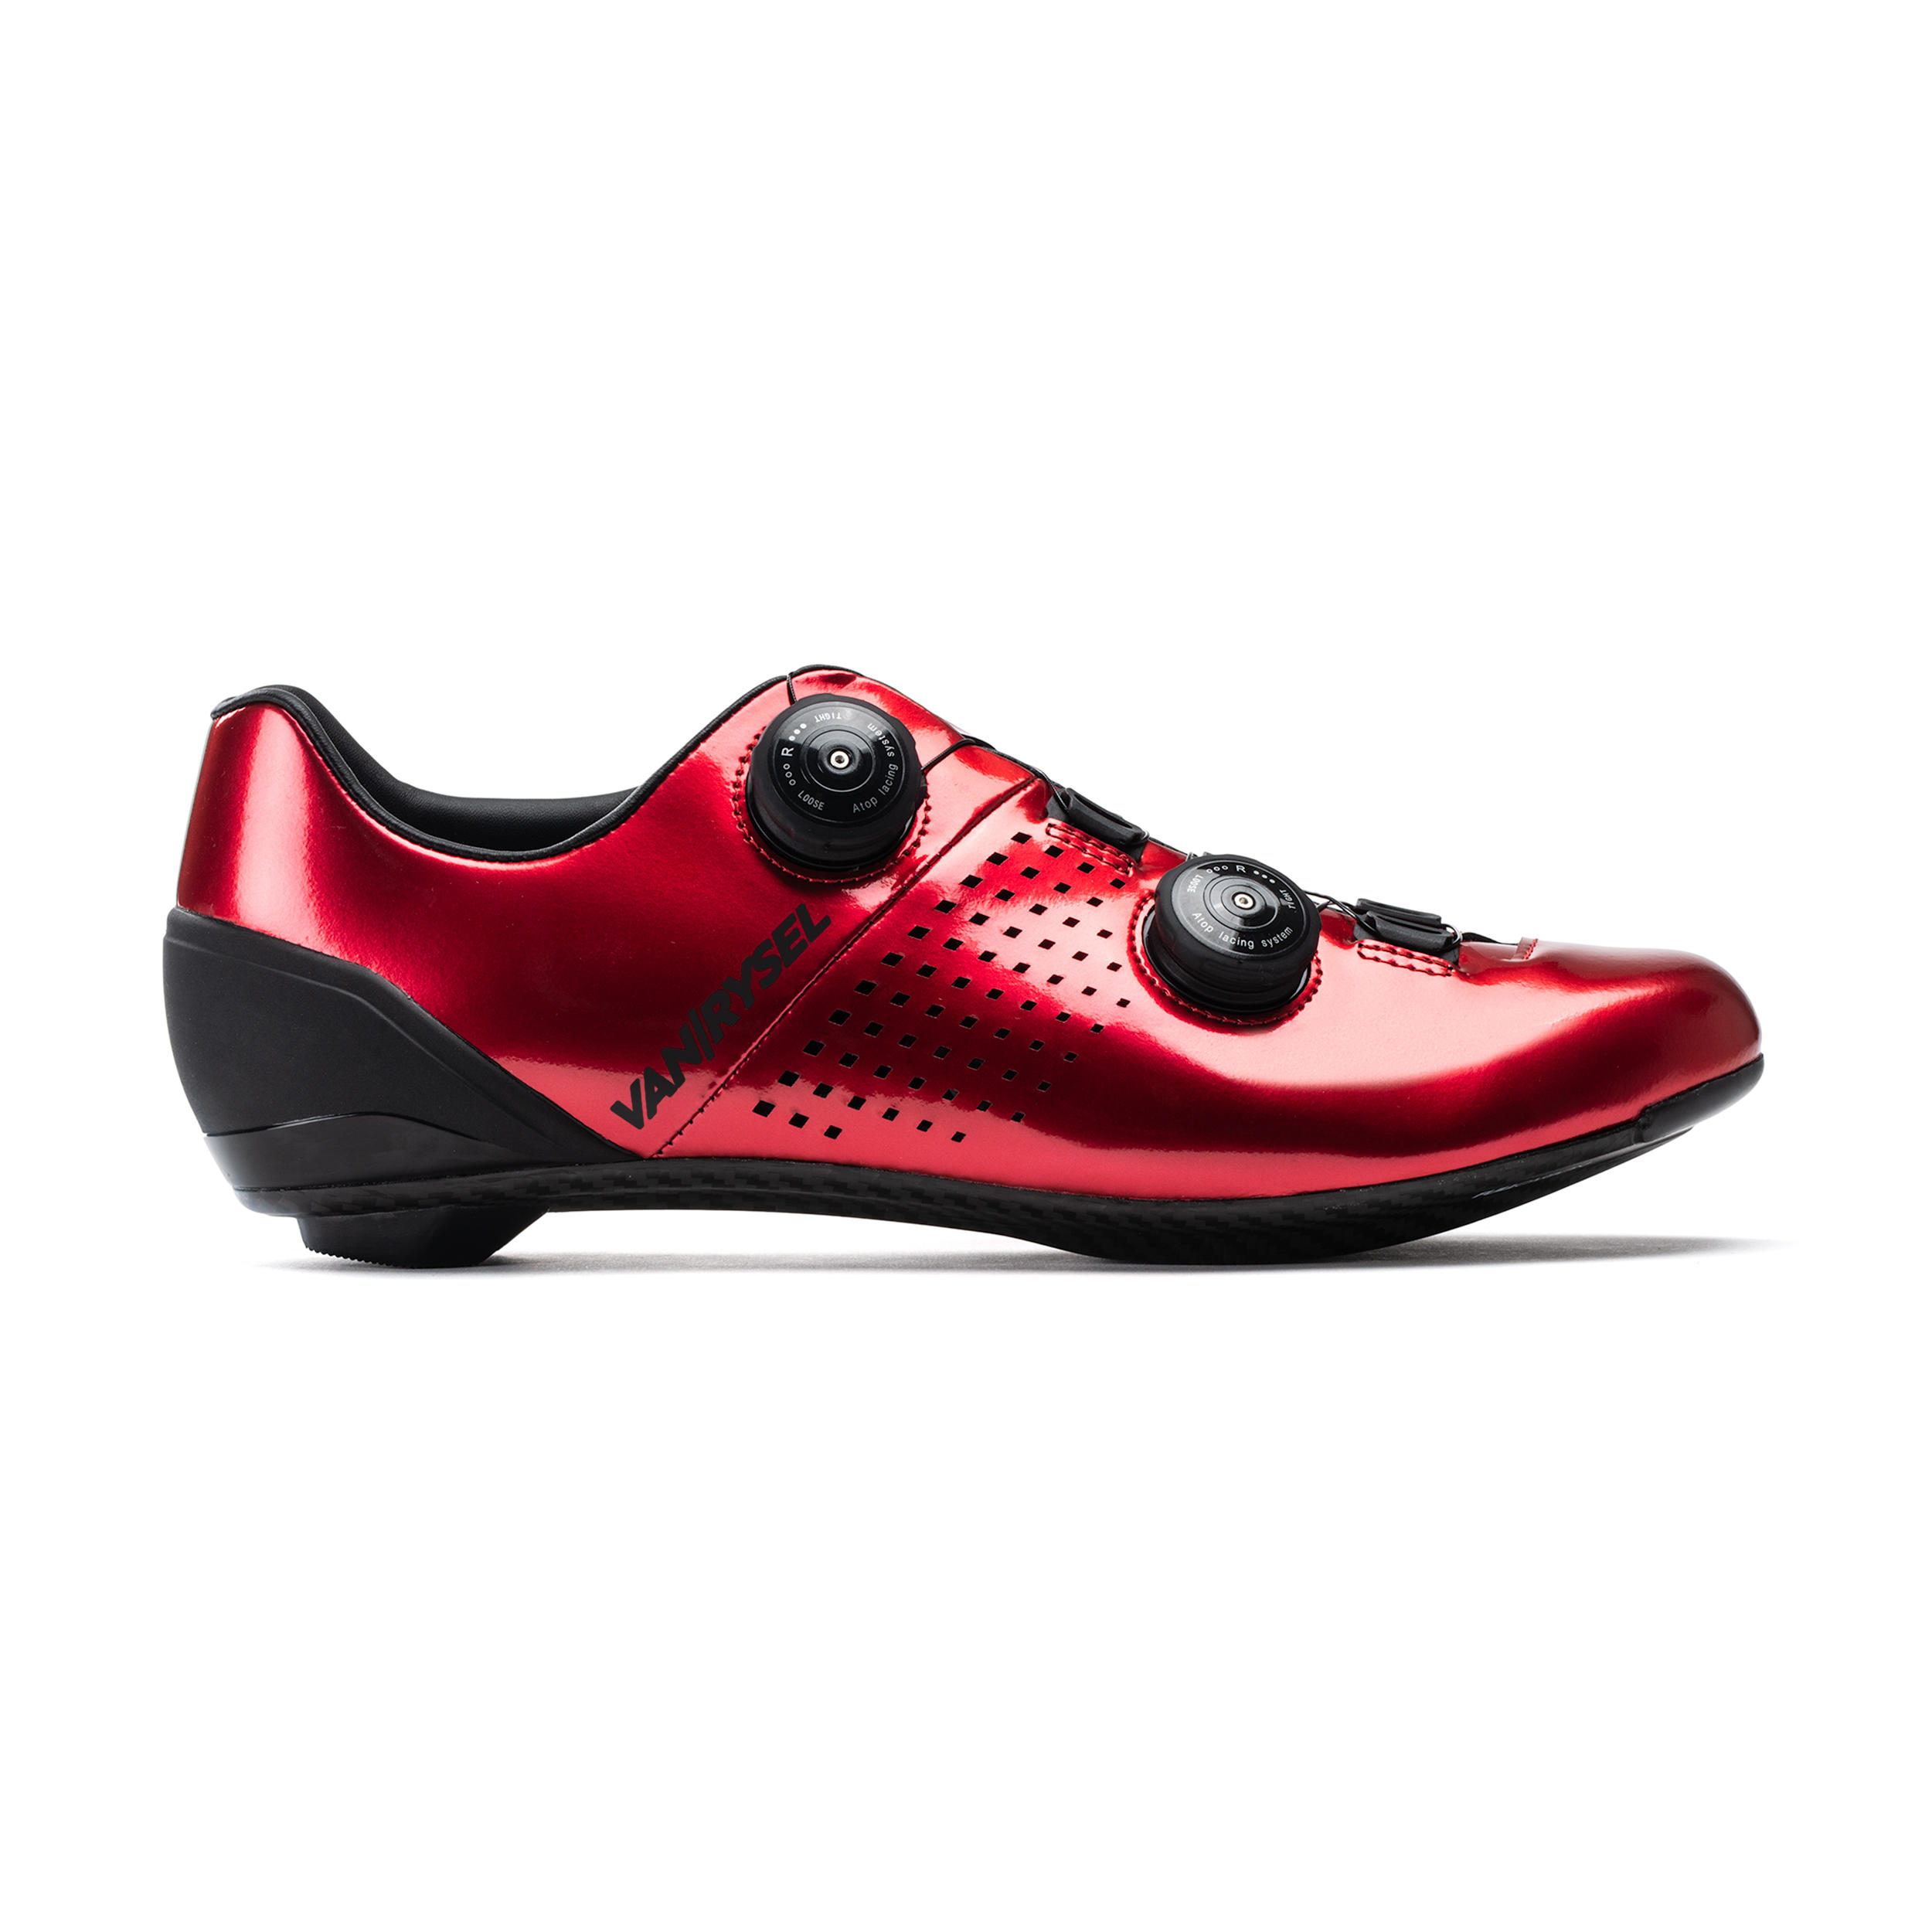 RoadR 900 Full Carbon Road Cycling Shoe - Red 3/6